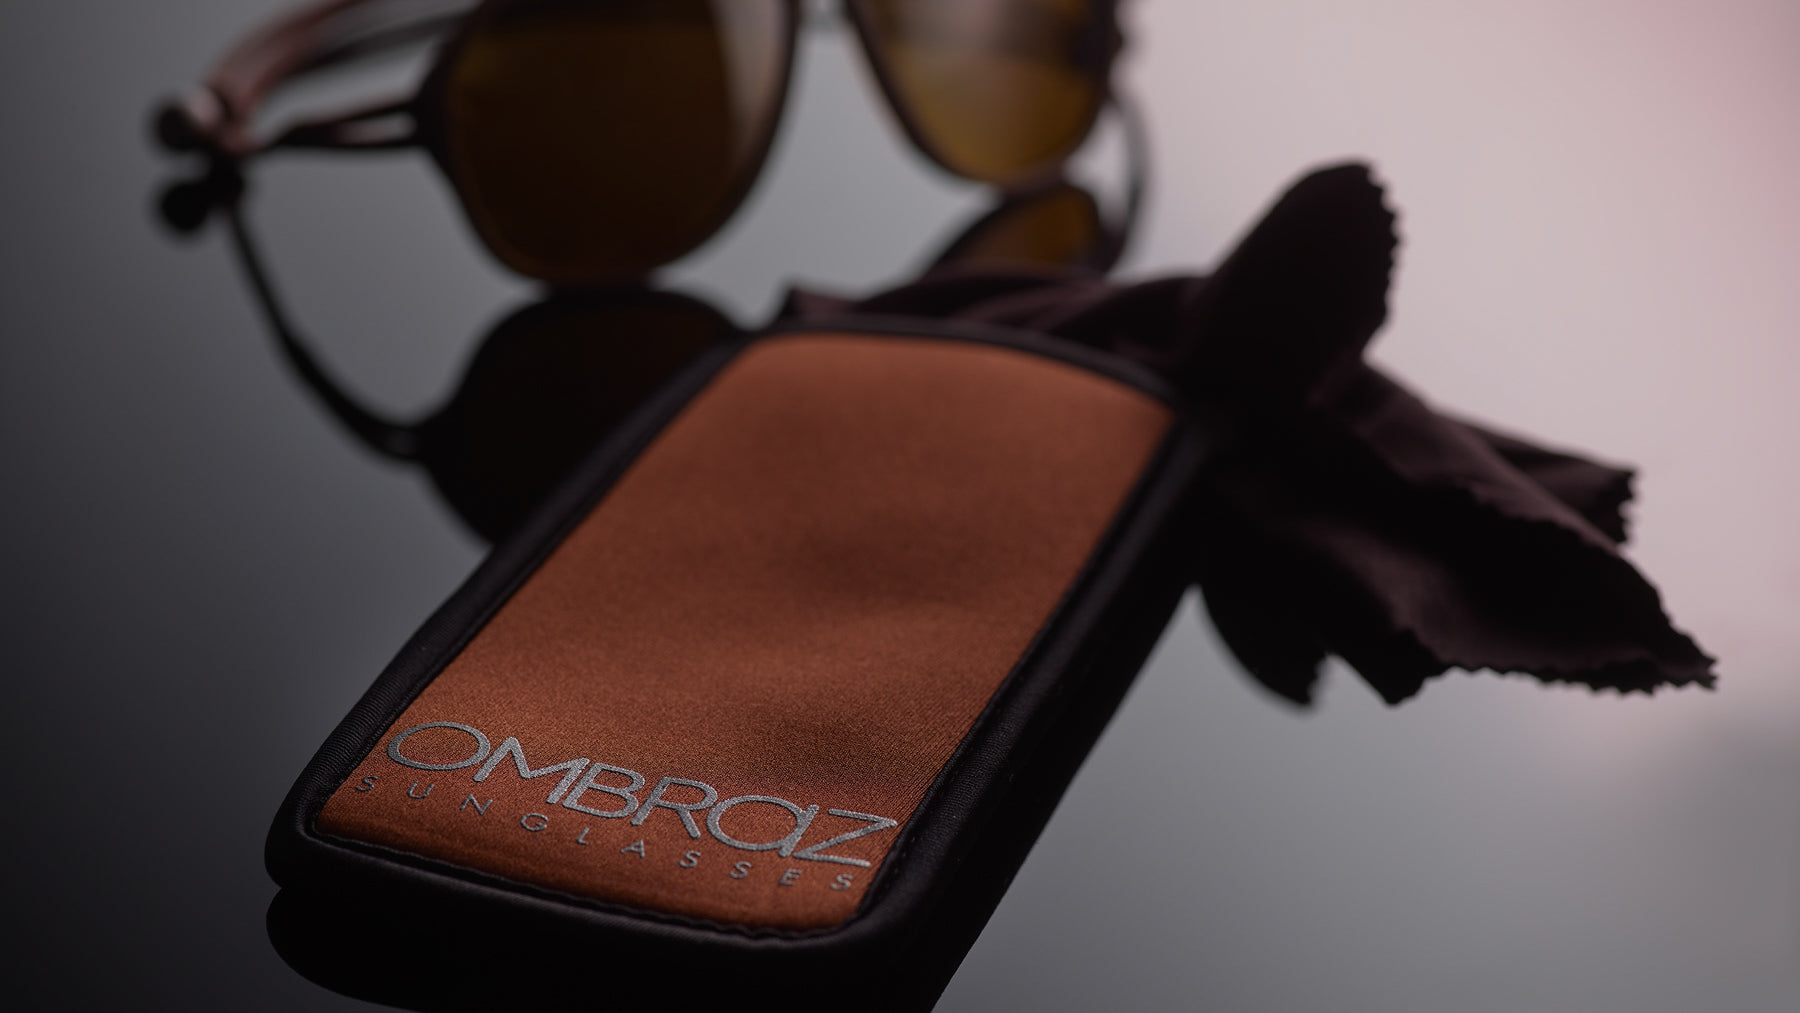 Neoprene Case with Built-In Microfiber - Ombraz solve what frustrates you about sunglasses. Handmade frames attach directly to an adjustable cord that keeps the sunglasses securely & comfortably in place. 2019 Sunglass of the year from Backpacker Magazine, Ombraz are lightweight, easy to pack & stow & are equipped with world-class polarized Zeiss lenses. Armless sunglasses with a built-in cord.